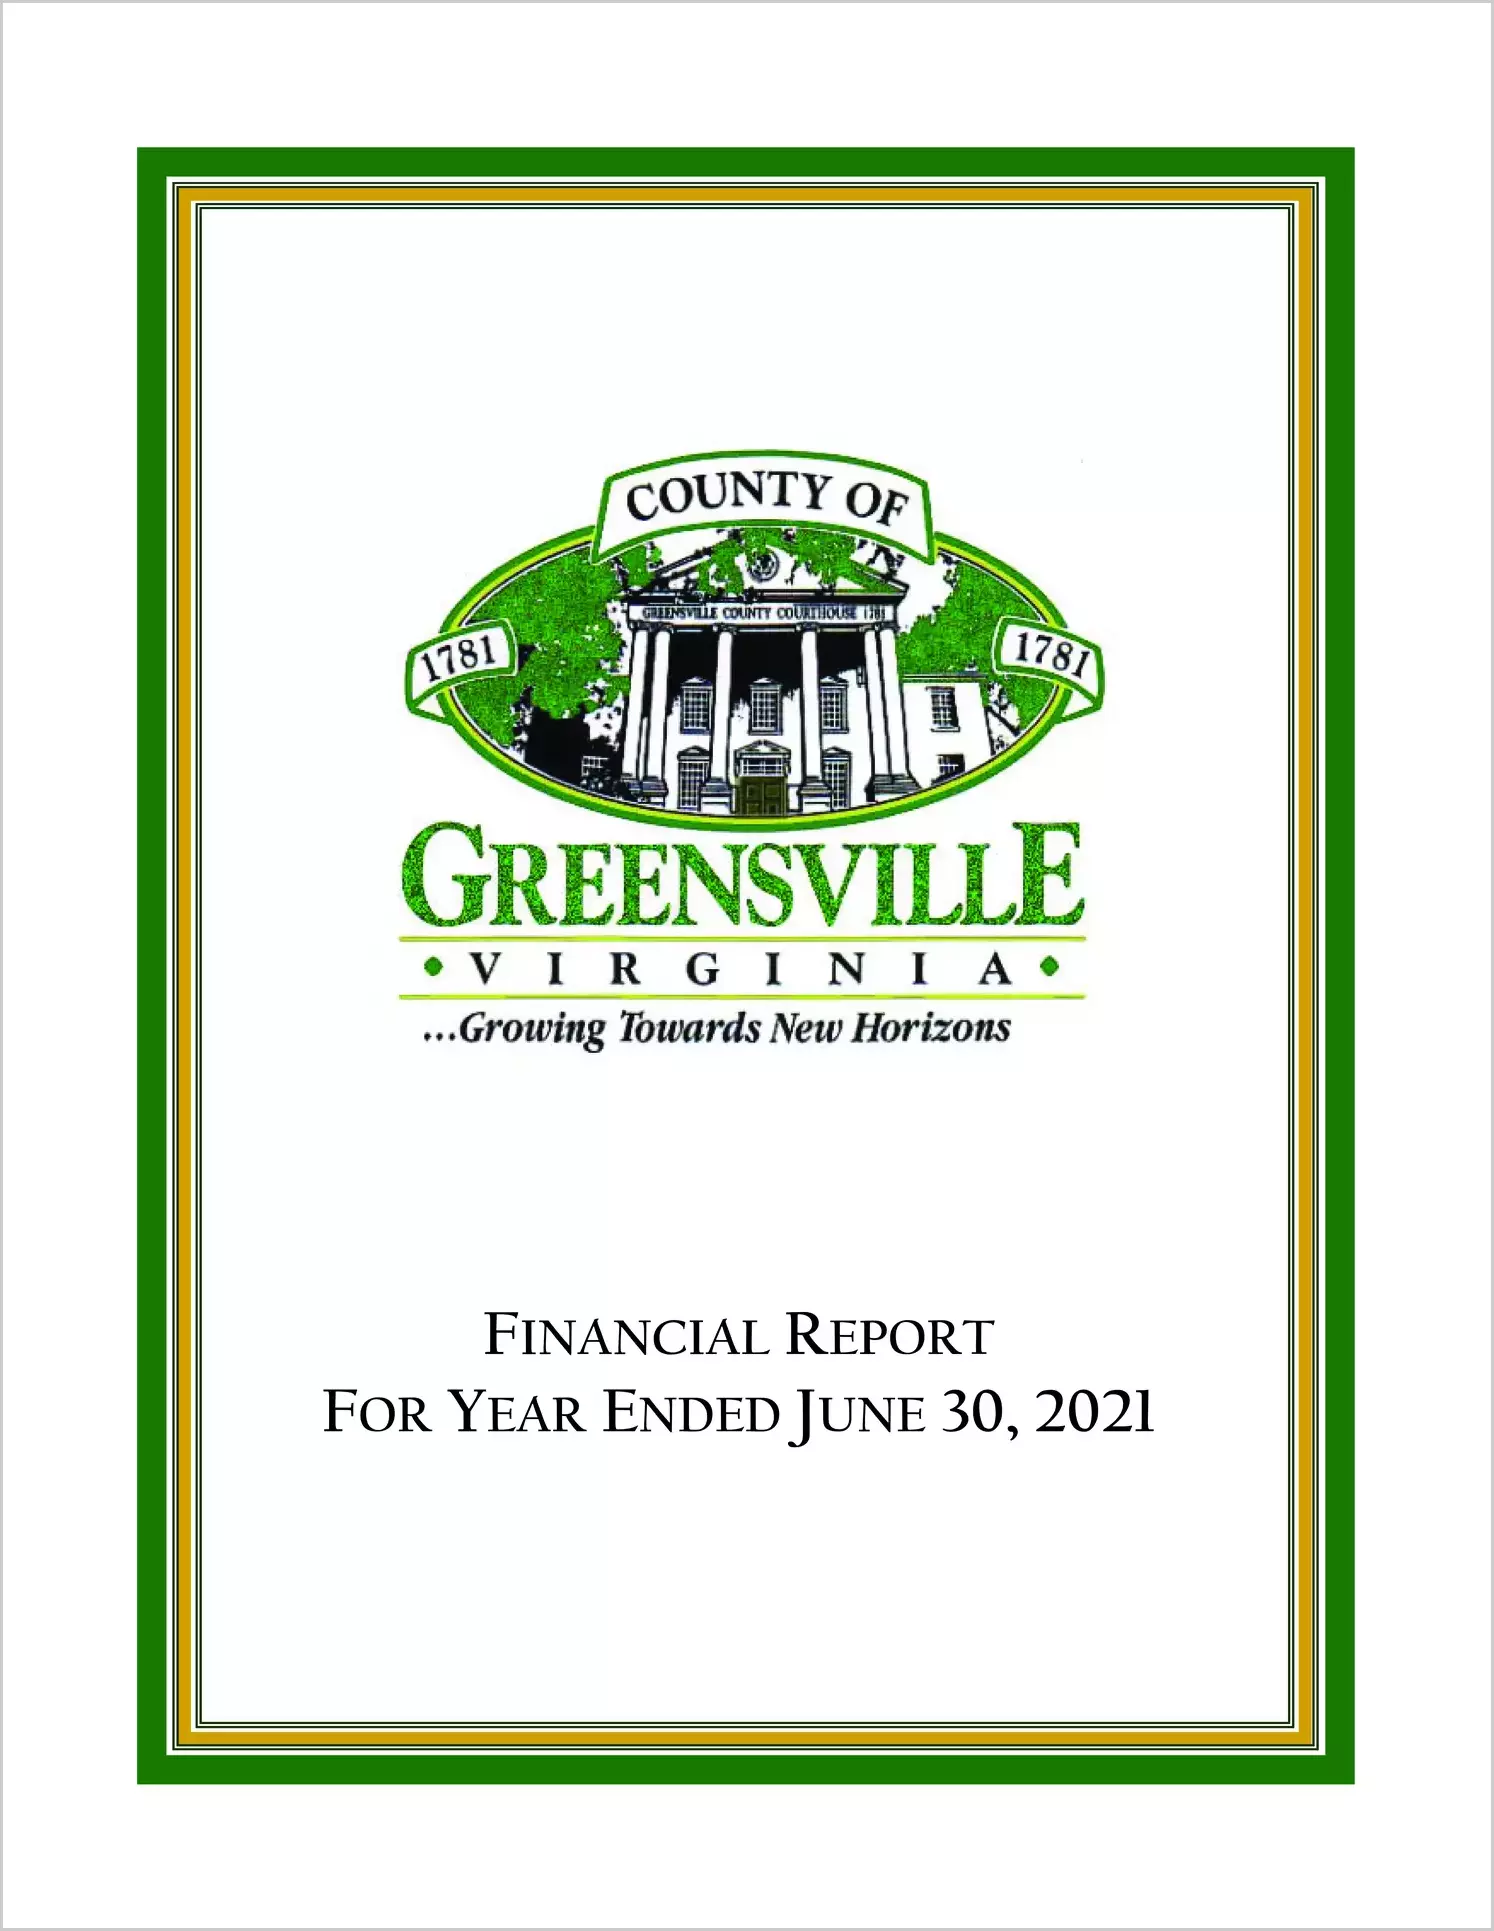 2021 Annual Financial Report for County of Greensville